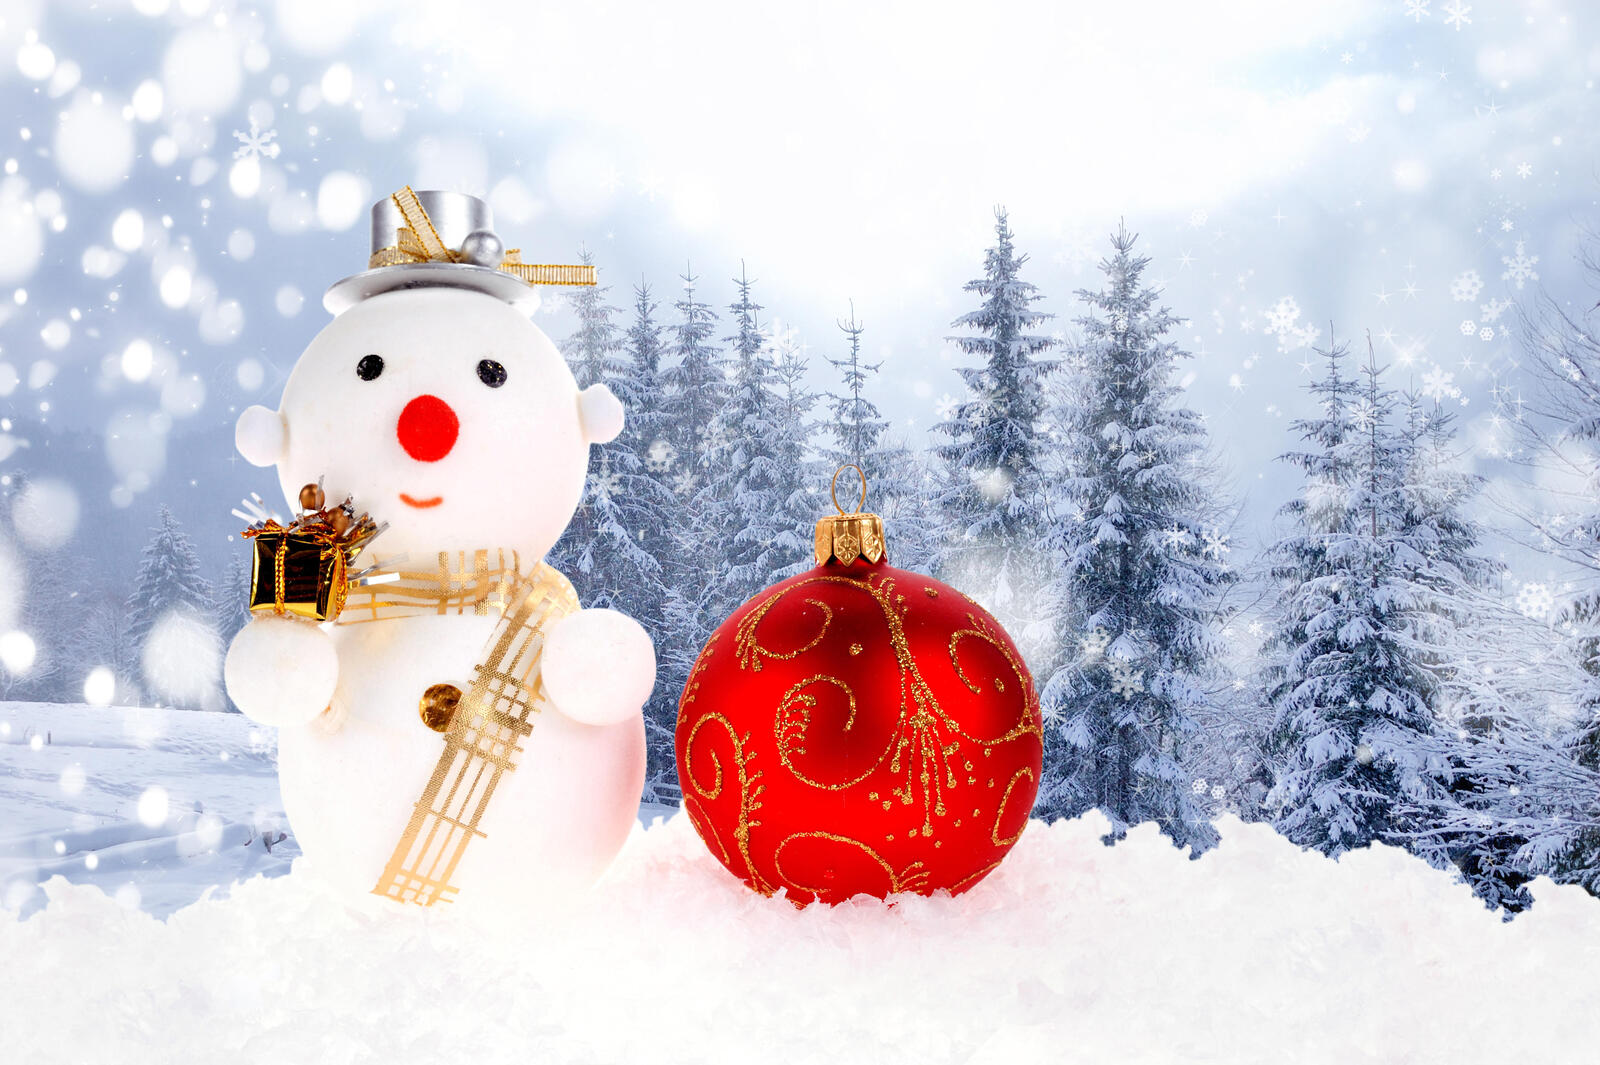 Wallpapers snowman christmas new year wallpapers on the desktop